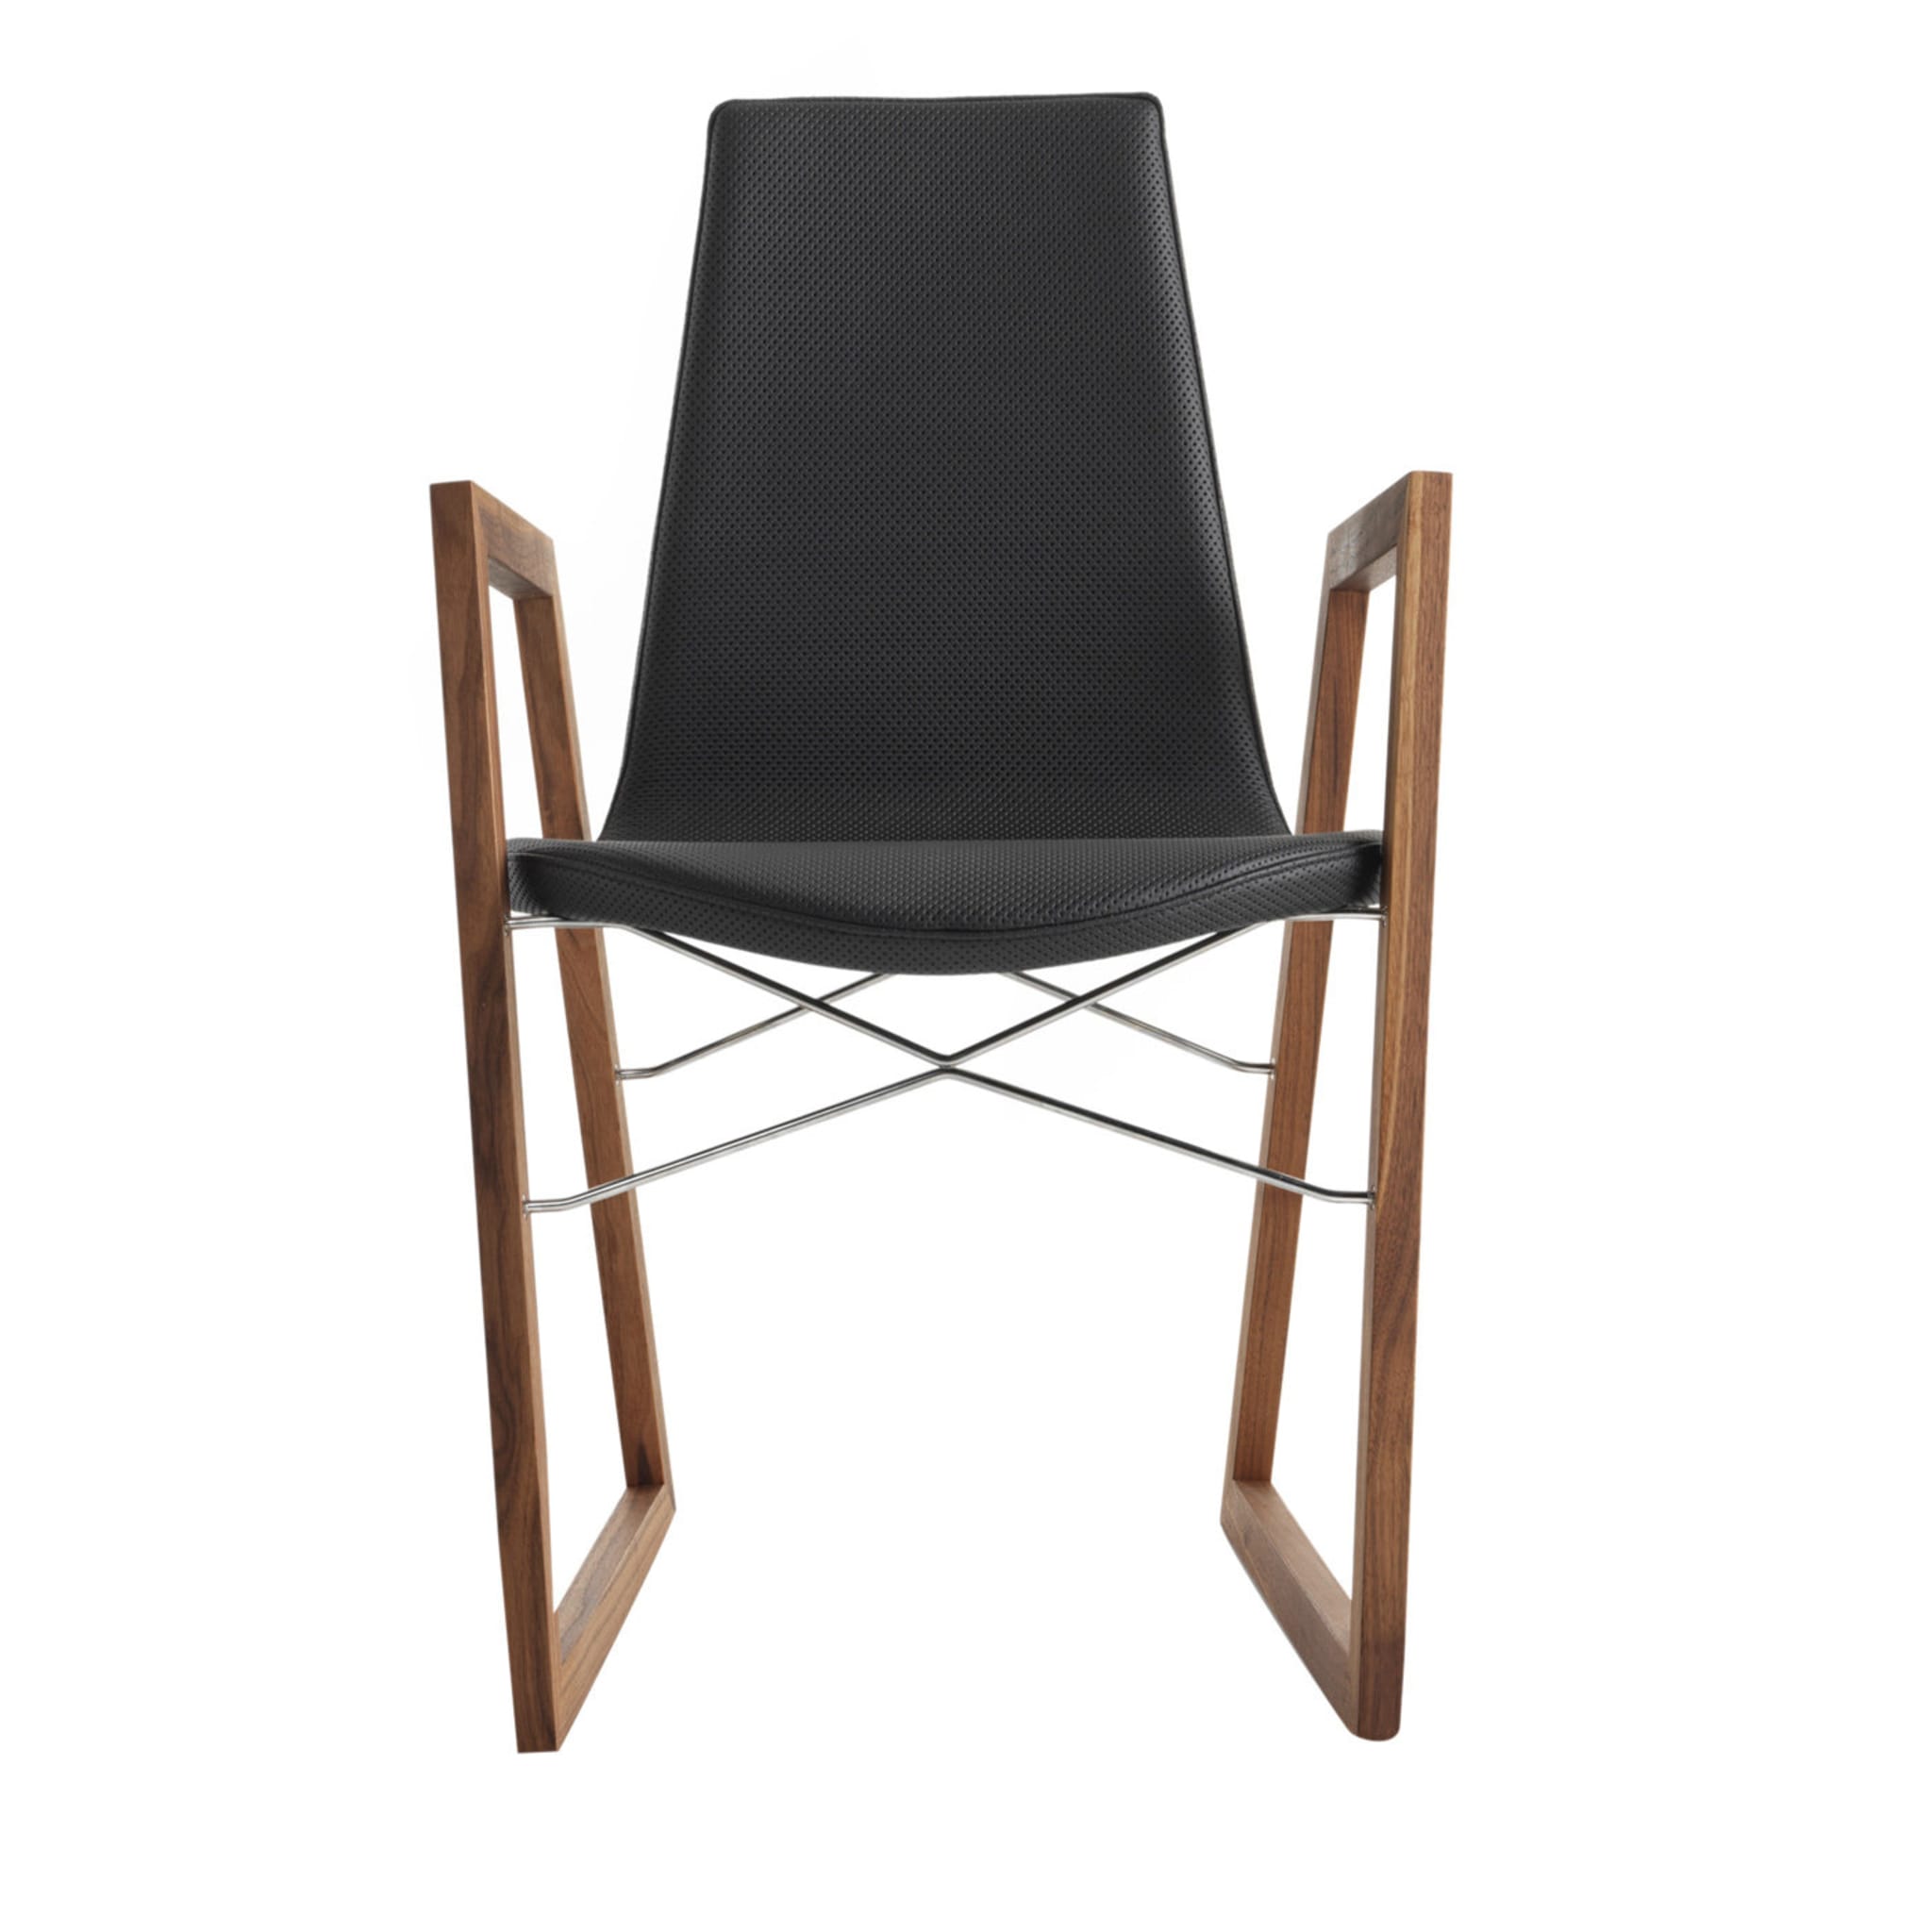 Ray Black Chair by Orlandini Design - Main view